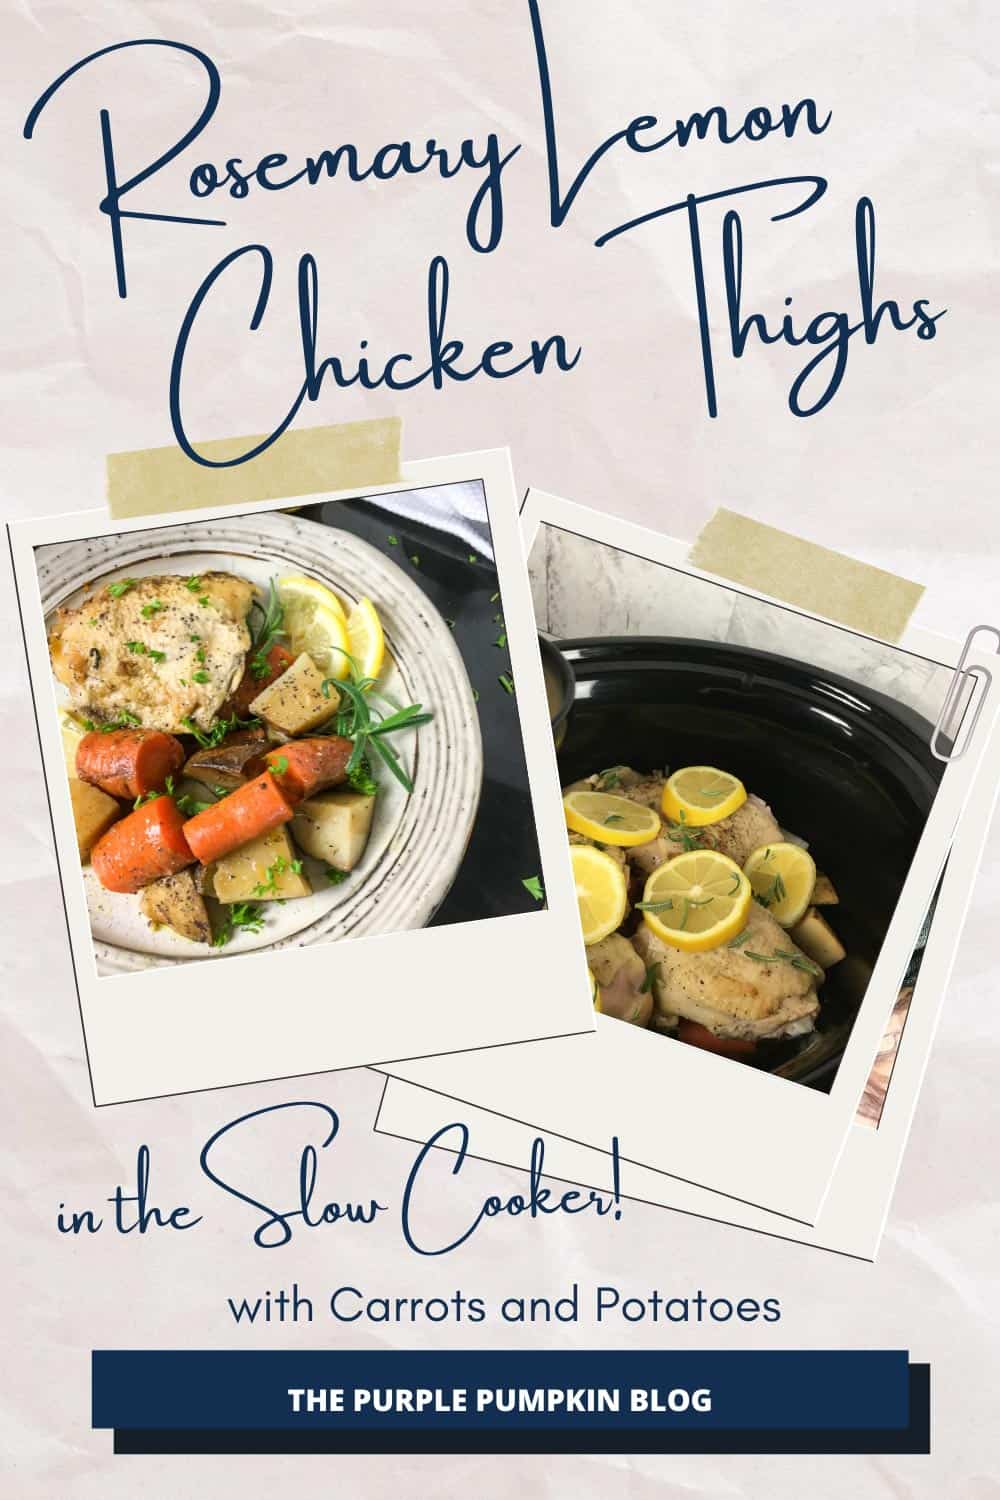 Rosemary-Lemon-Chicken-Thighs-in-the-Slow-Cooker-2